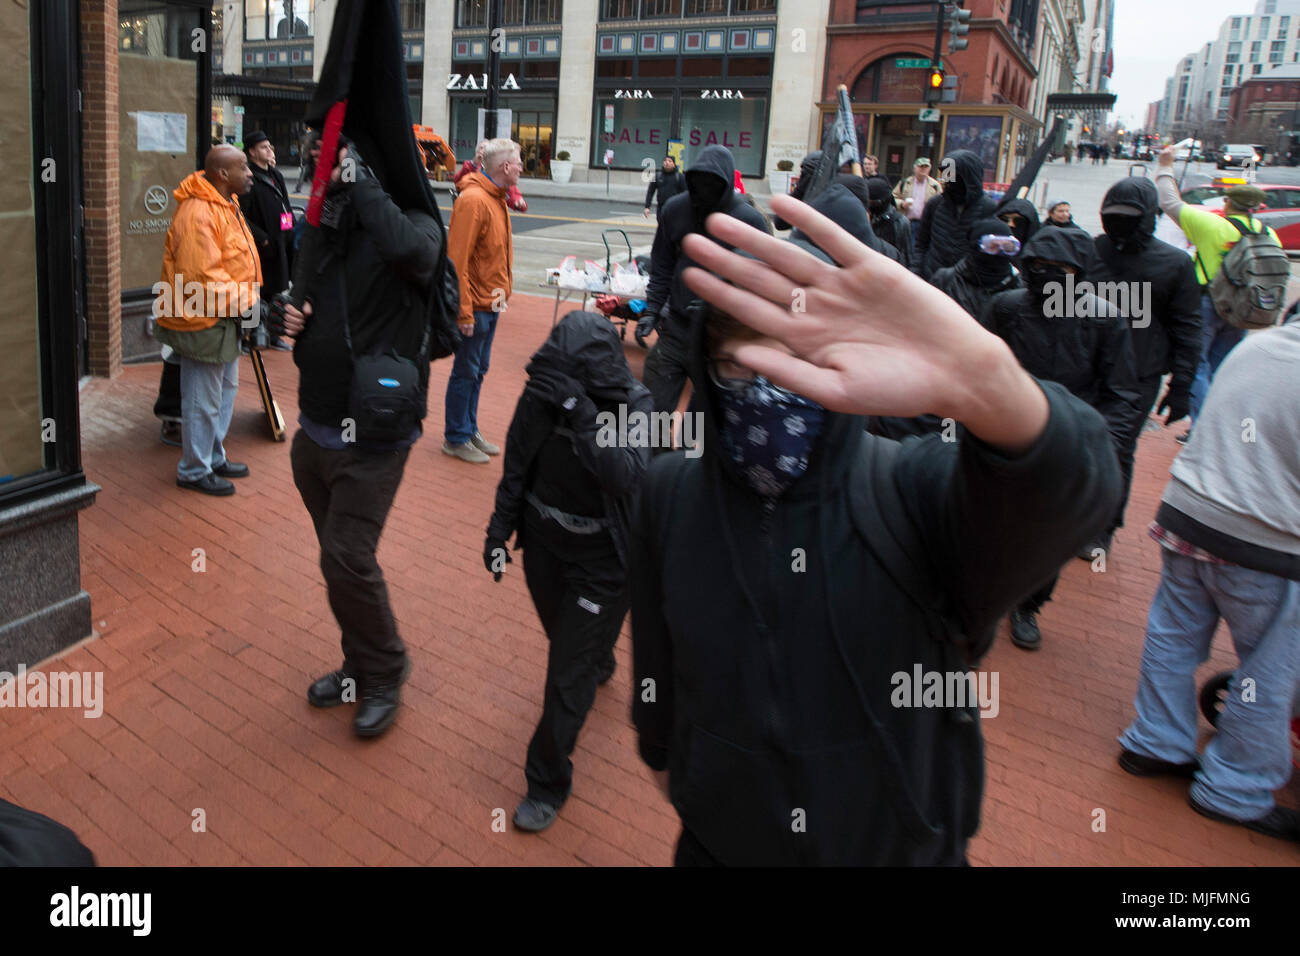 A member of the black bloc, an Antifa organization, marches near a security checkpoint prior to the inauguration of United States President Donald J. Trump in Washington, DC on January 20, 2017. Stock Photo